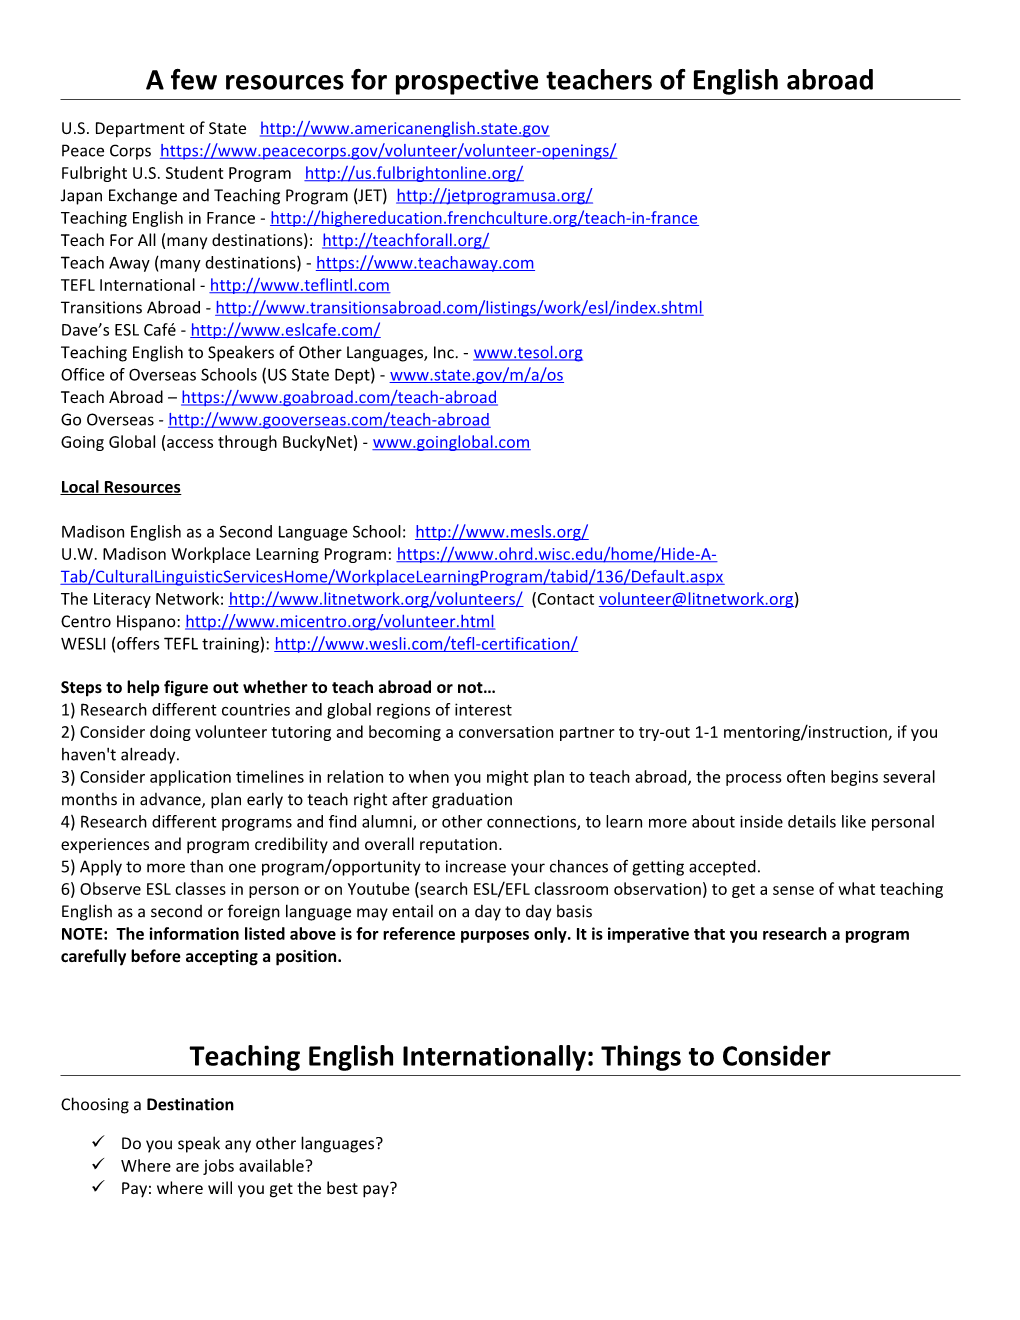 A Few Resources for Prospective Teachers of English Abroad